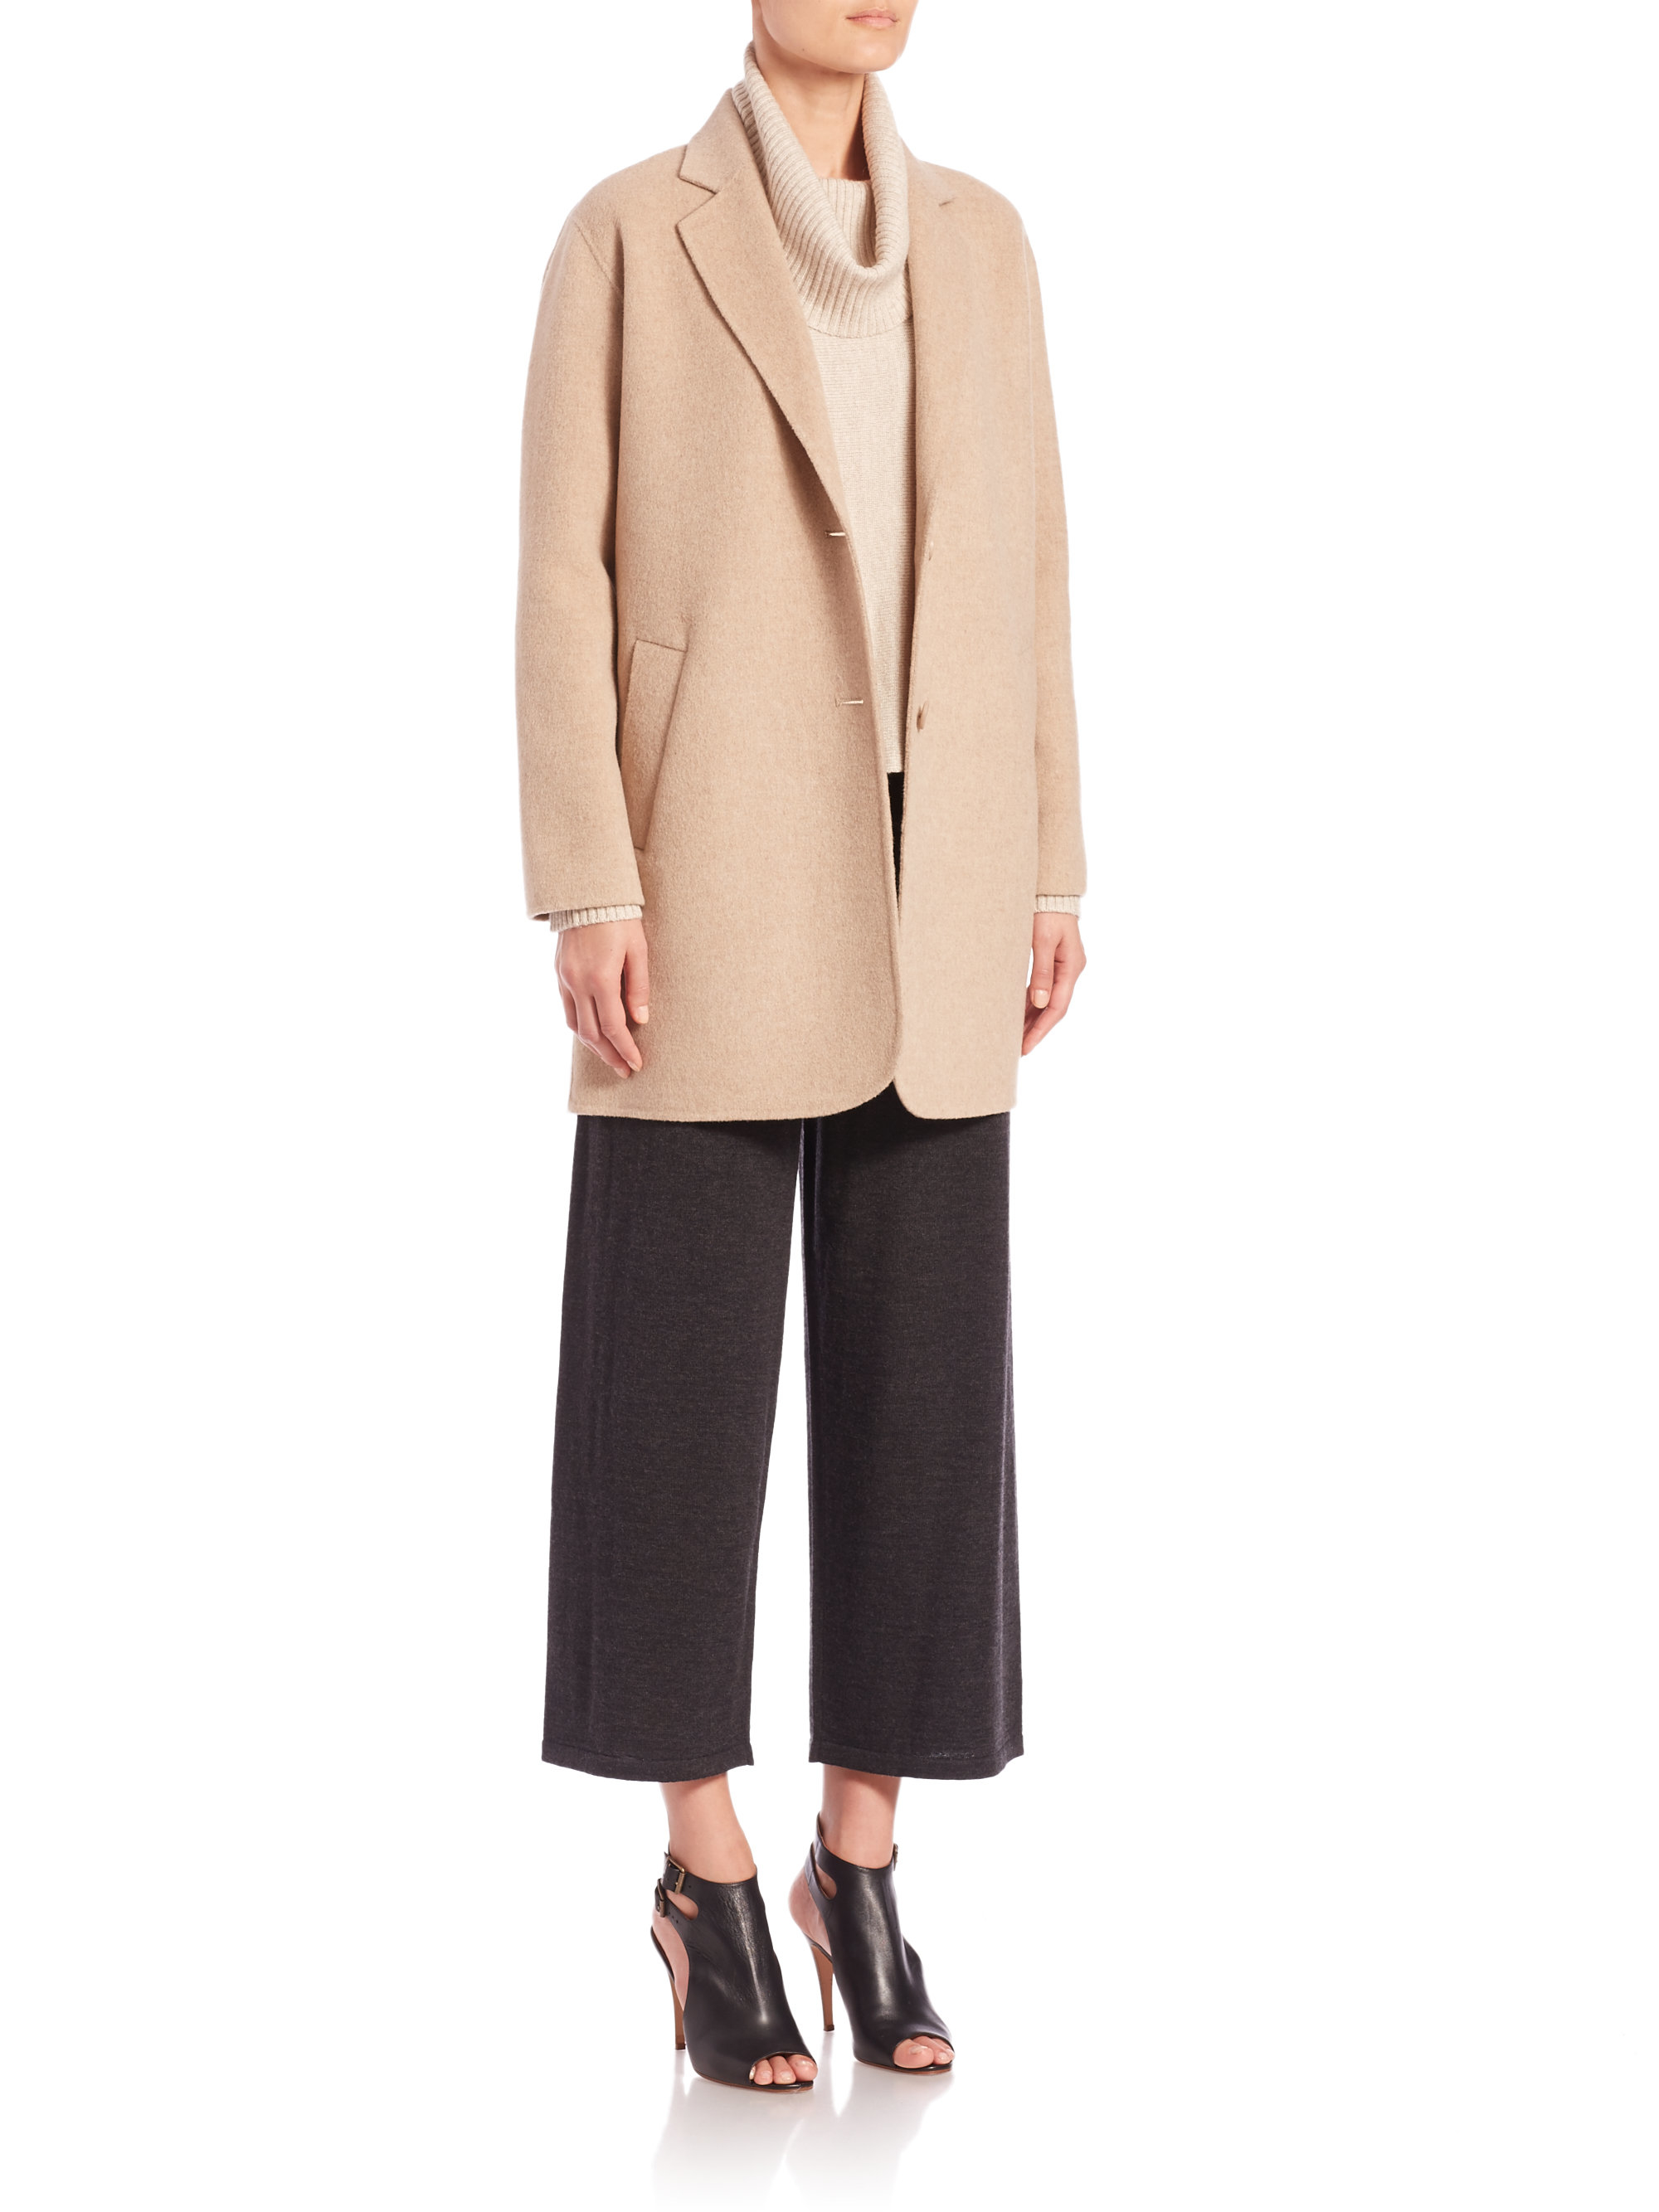 Lyst - Eileen Fisher Brushed Wool-blend Oversized Blazer in Natural